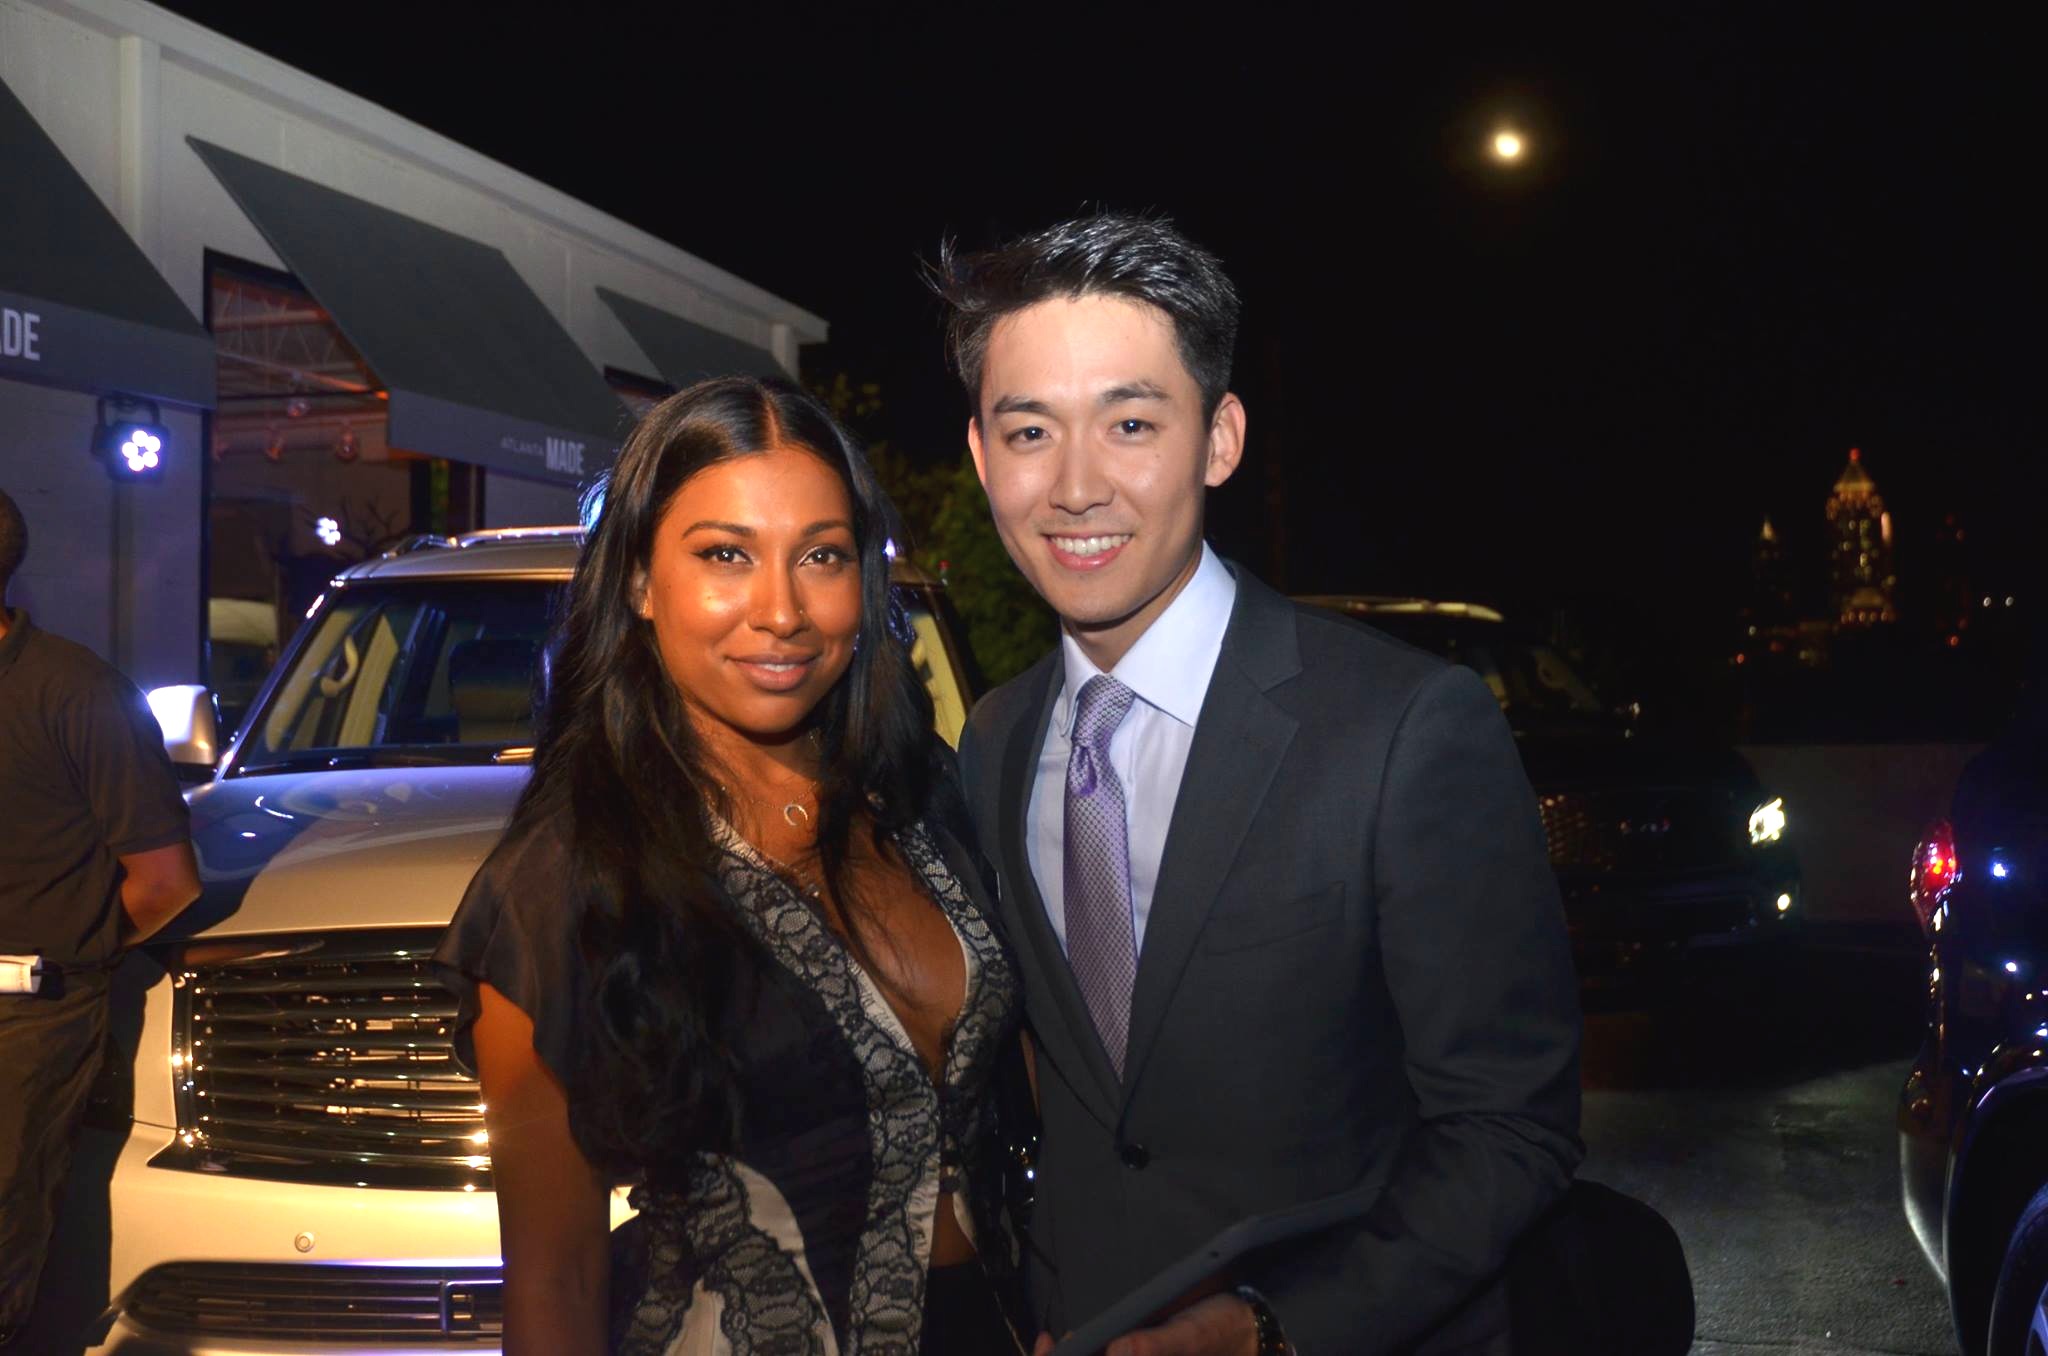 VIP event at Pandora. Two time Grammy Awards for Best Traditional R&B Performance and Best R&B Song, Melanie Fiona & special guest, actor, Dior C. Choi.